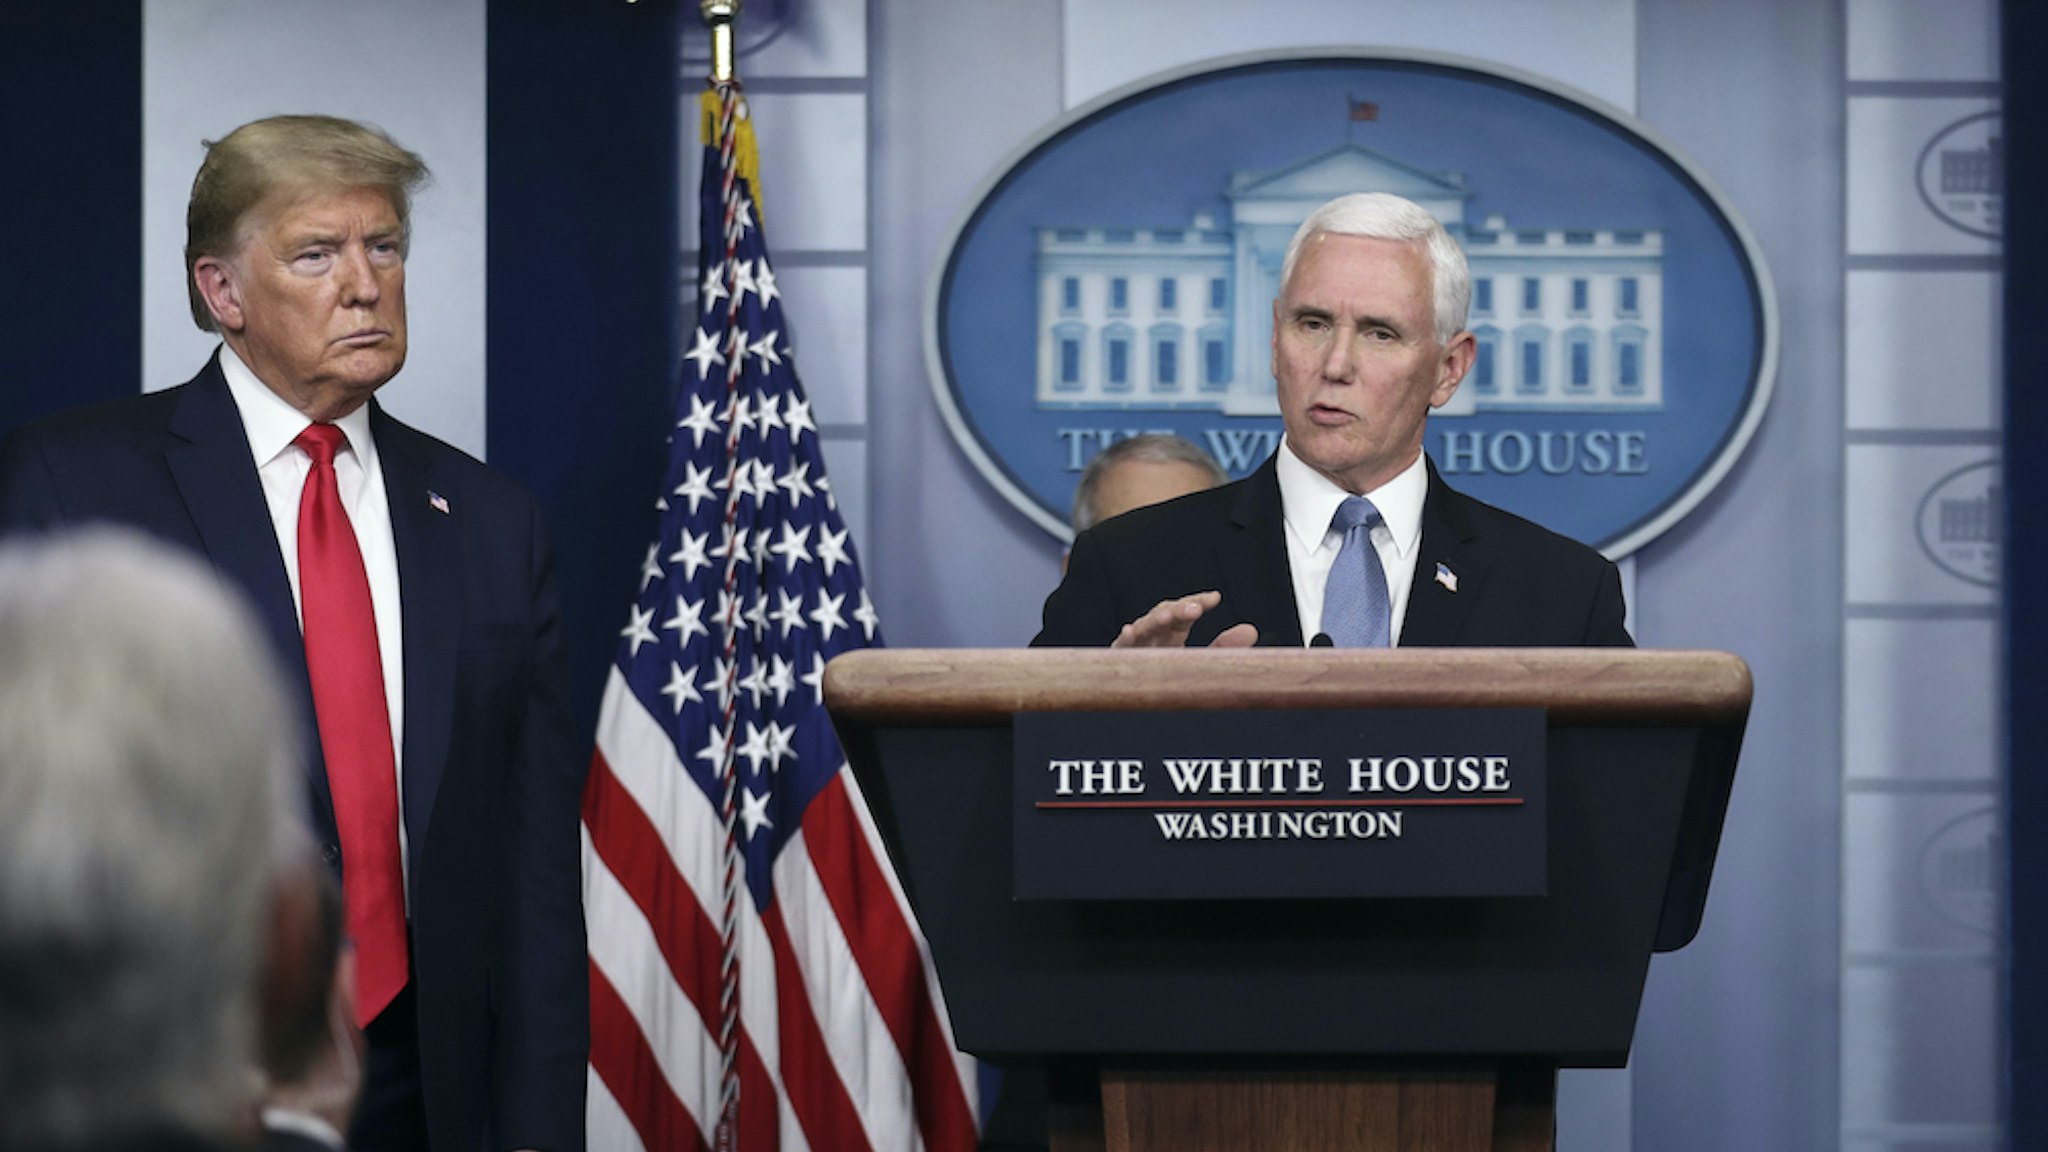 U.S. Vice President Mike Pence speaks as President Donald Trump, left, and Larry Kudlow, director of the U.S. National Economic Council, right, listen during a Coronavirus Task Force news conference in the briefing room of the White House in Washington, D.C., U.S., on Tuesday, March 24, 2020. Trump said he envisions “packed” U.S. churches on Easter Sunday as he described his ambition to abandon stringent public-health measures to combat the coronavirus outbreak and re-open the economy in mid-April. Photographer: Oliver Contreras/SIPA/Bloomberg